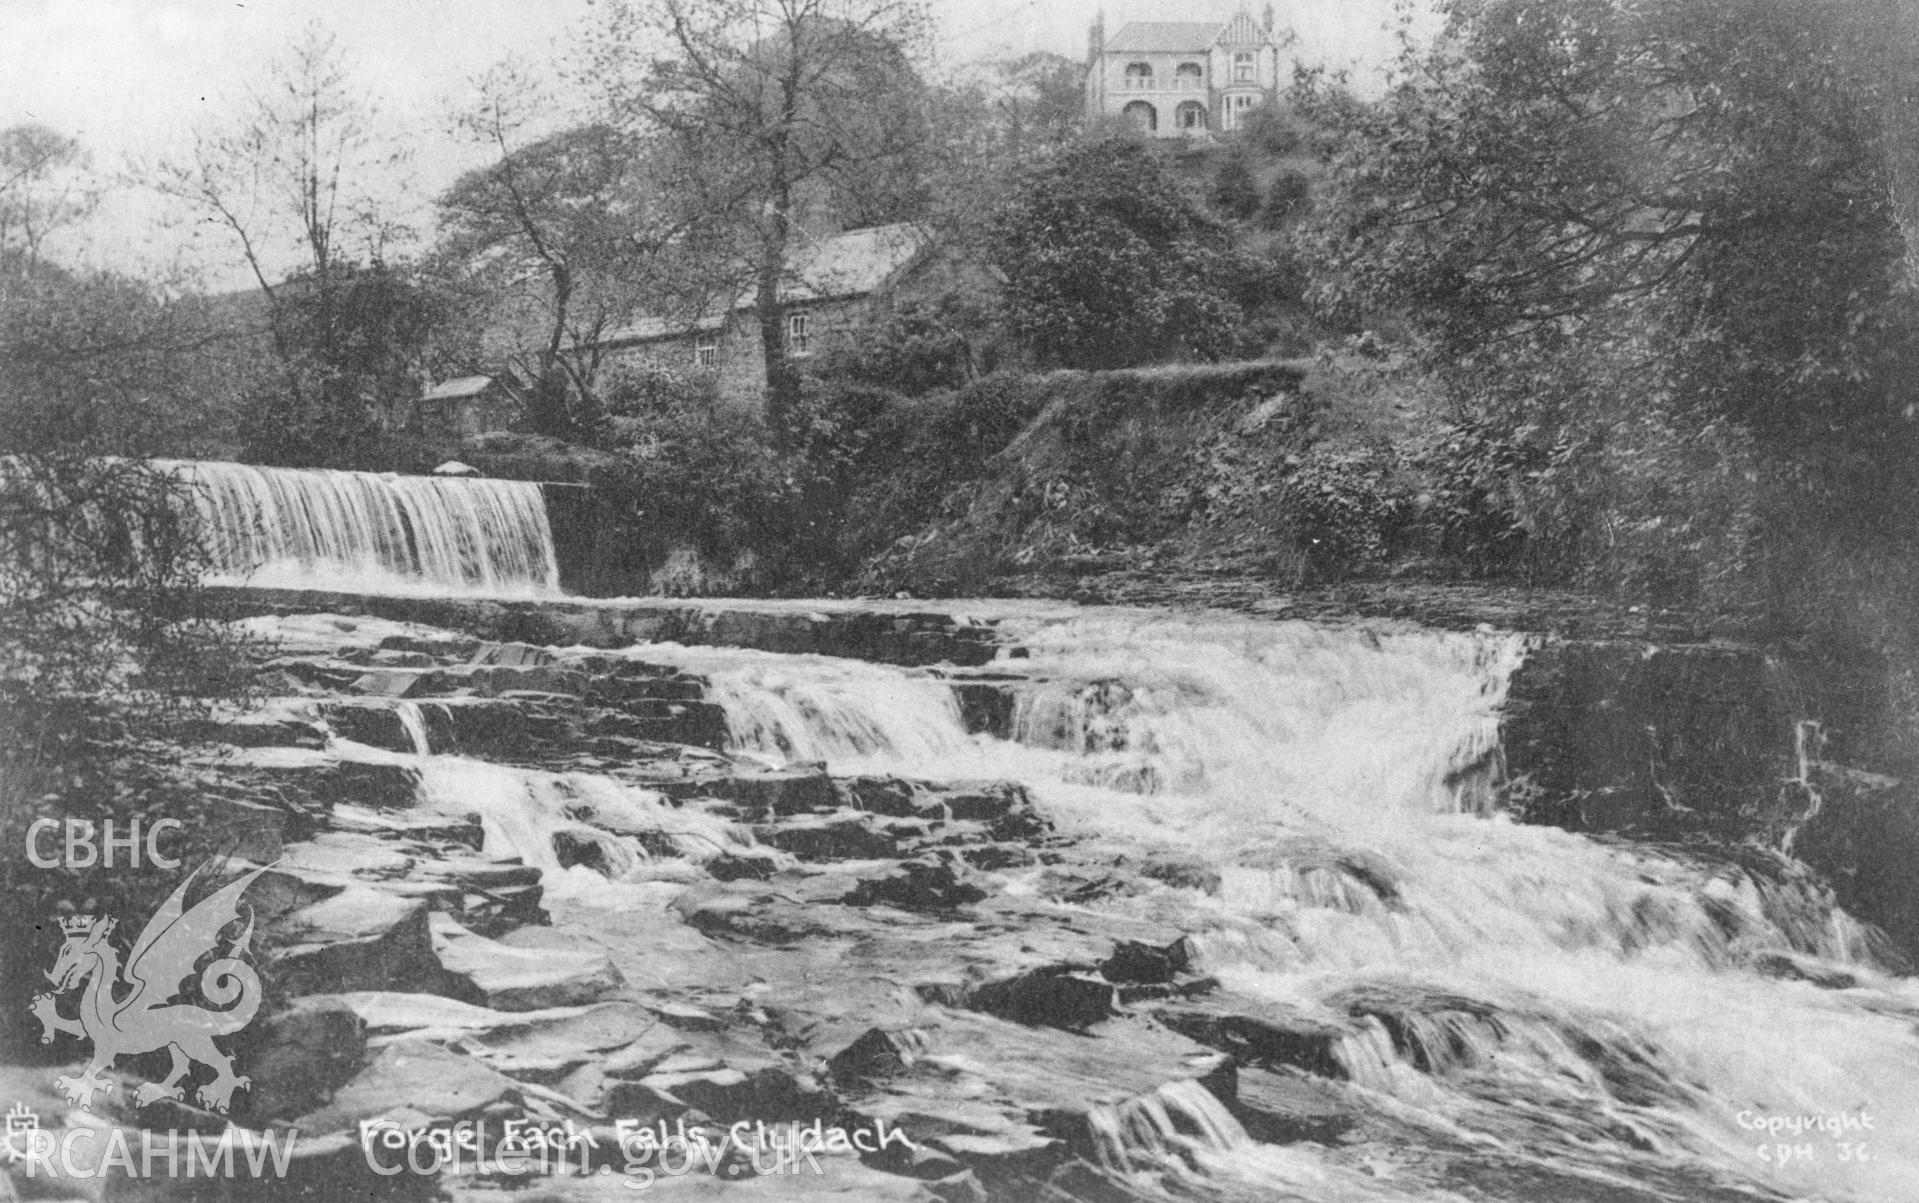 Black and white acetate negative showing Forge Fach Falls, Clydach.